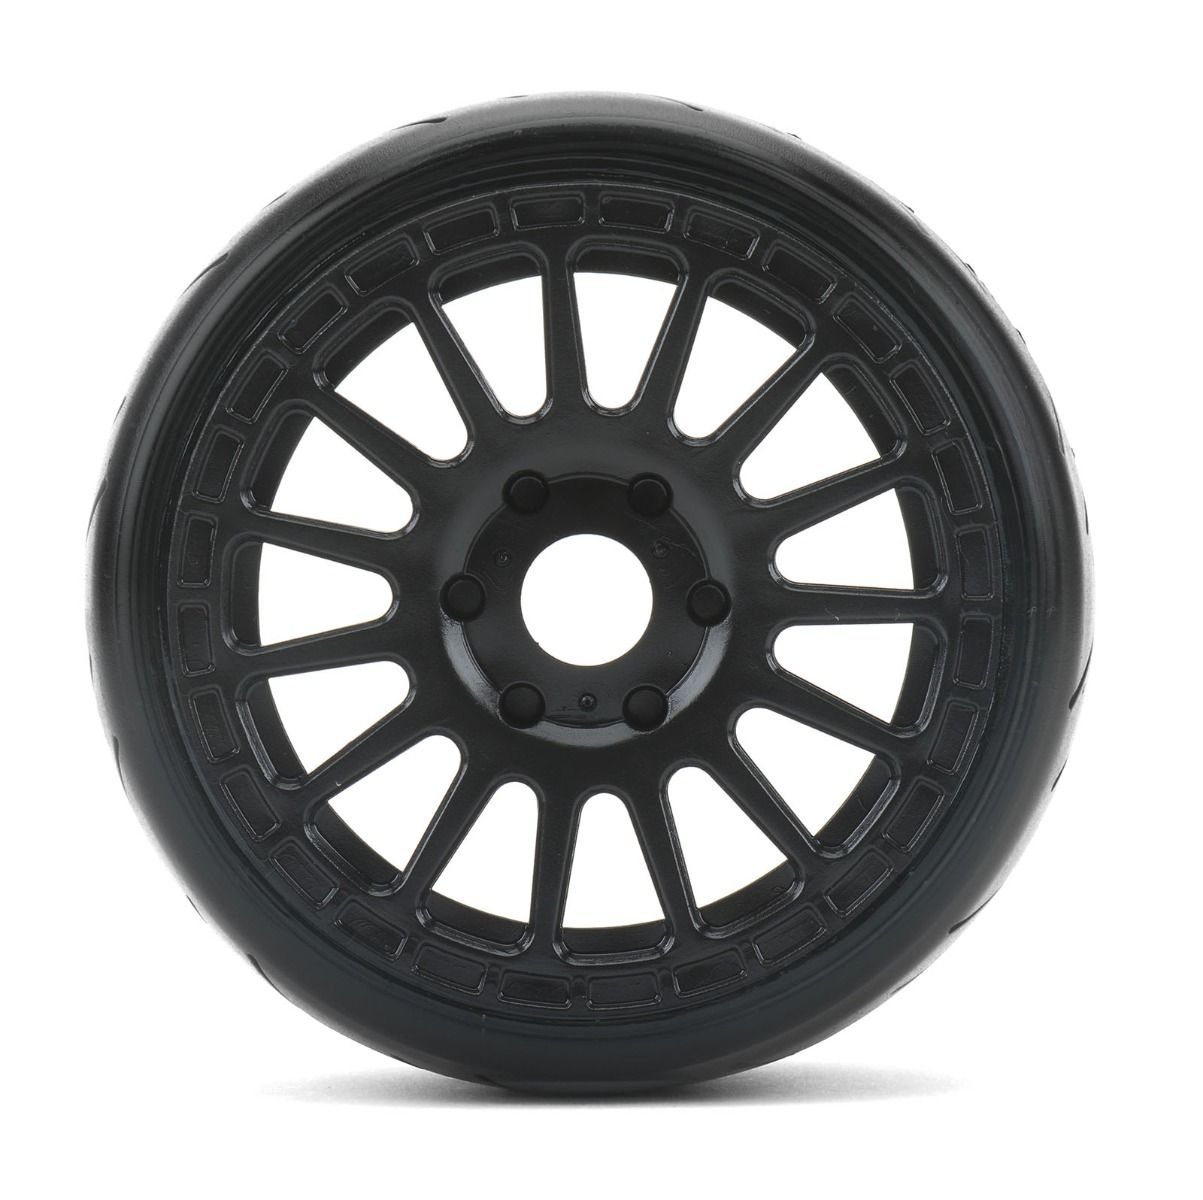 Powerhobby 1/8 GT Atomic Belted Pre-Mounted Tires 17mm Hard Compound - PowerHobby